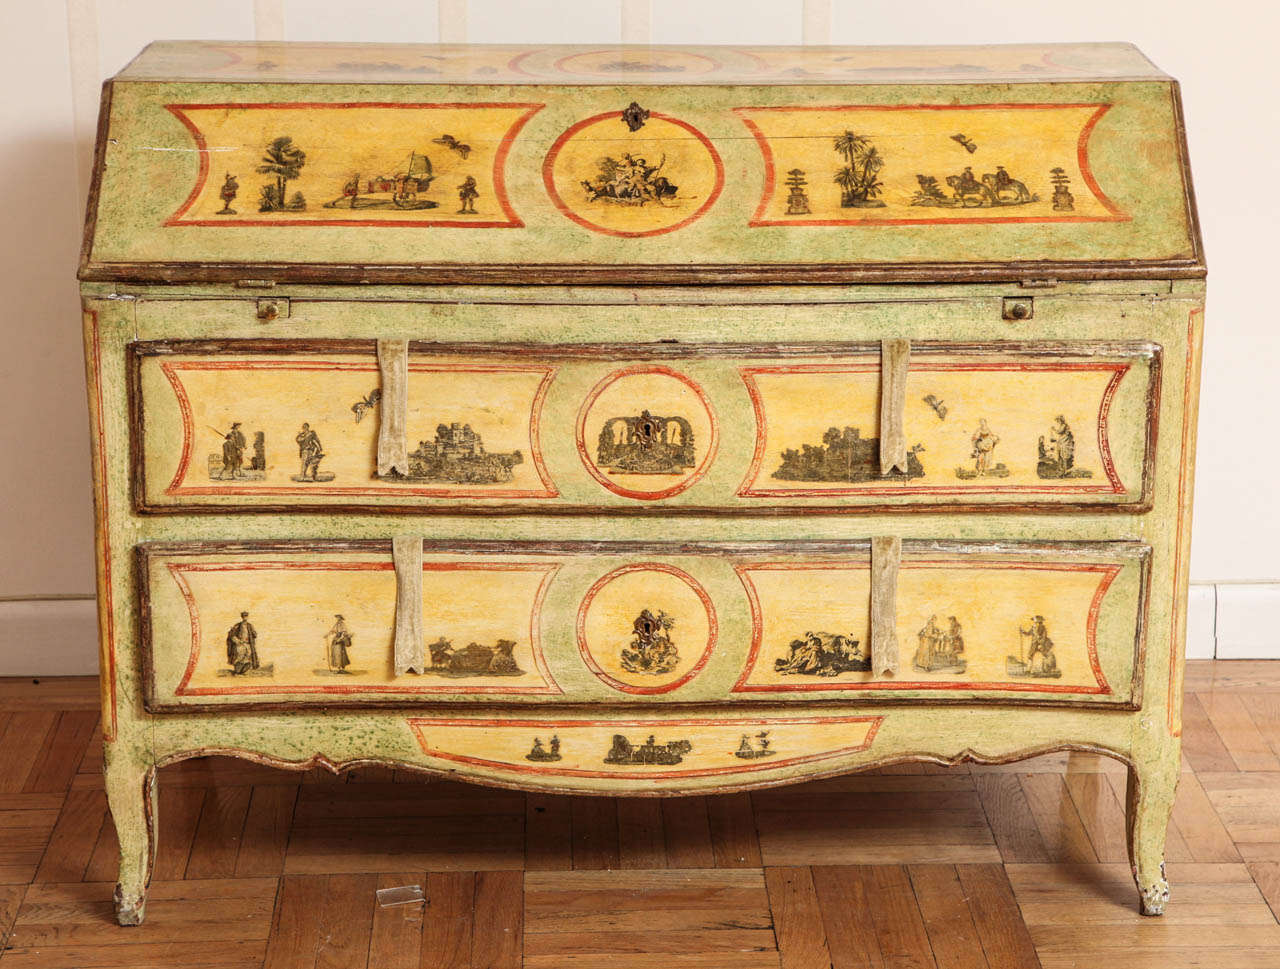 A 19th Century Painted and Decoupage Secretary
Italian Polychrome and Decoupage Bureau, the drop-front opening to a variety of drawers and cubbyholes, over two long drawers, raised on cabriole legs, the whole with decoupage accents of various